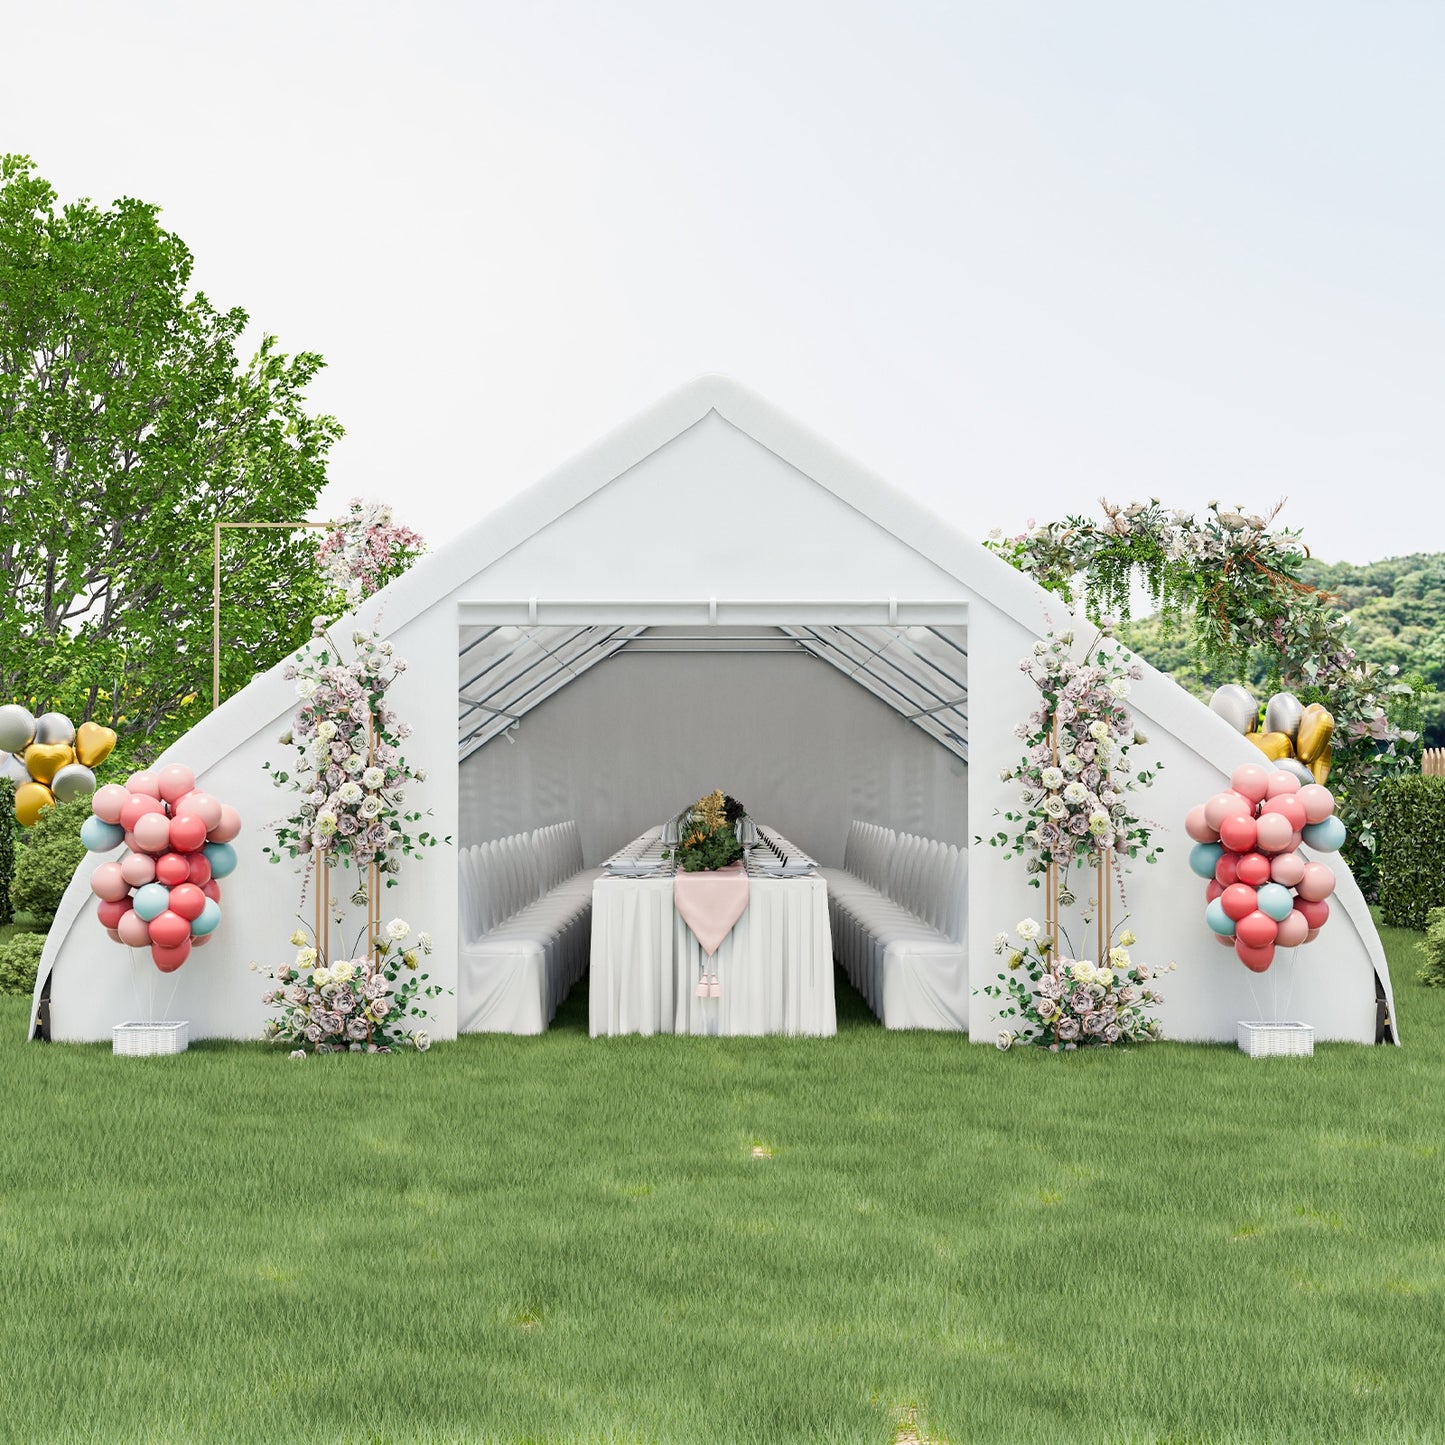 20 x 40 FT Peach Shaped Party Tent Wedding Canopy with Zipper Doors-White